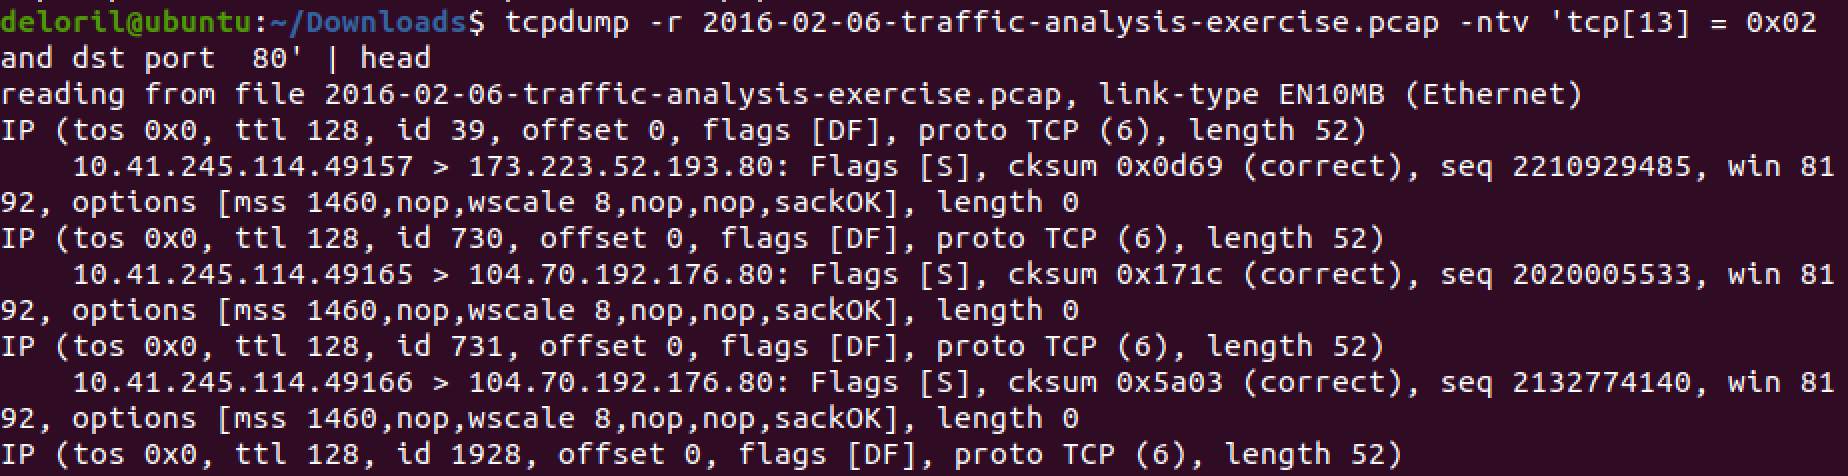 Let&rsquo;s see only the TCP SYN packets headed to port 80